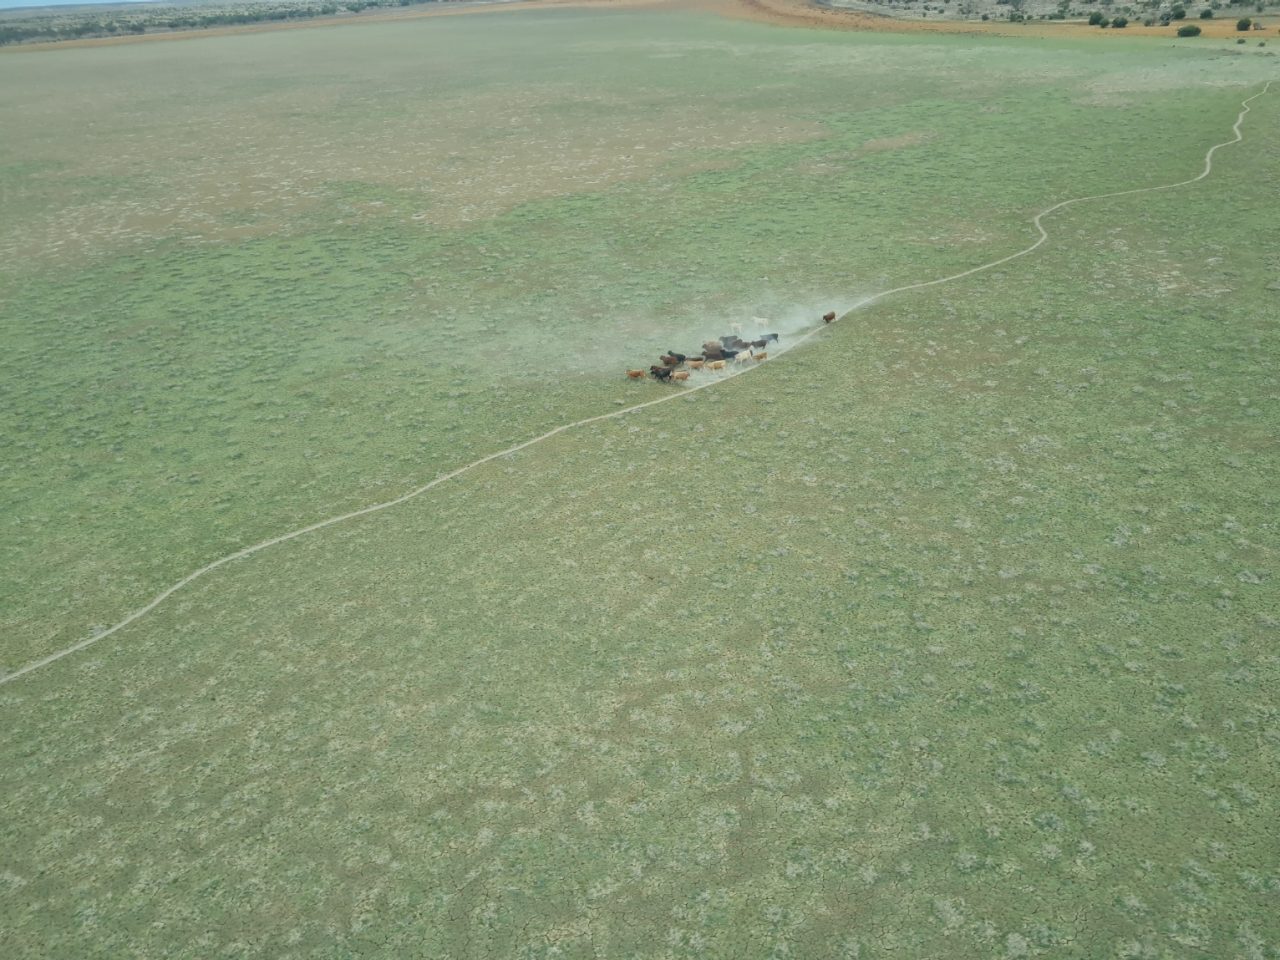 Aerial photo of dry lake covered in vegetation. Cattle running across the middle of the lake kicking up dust